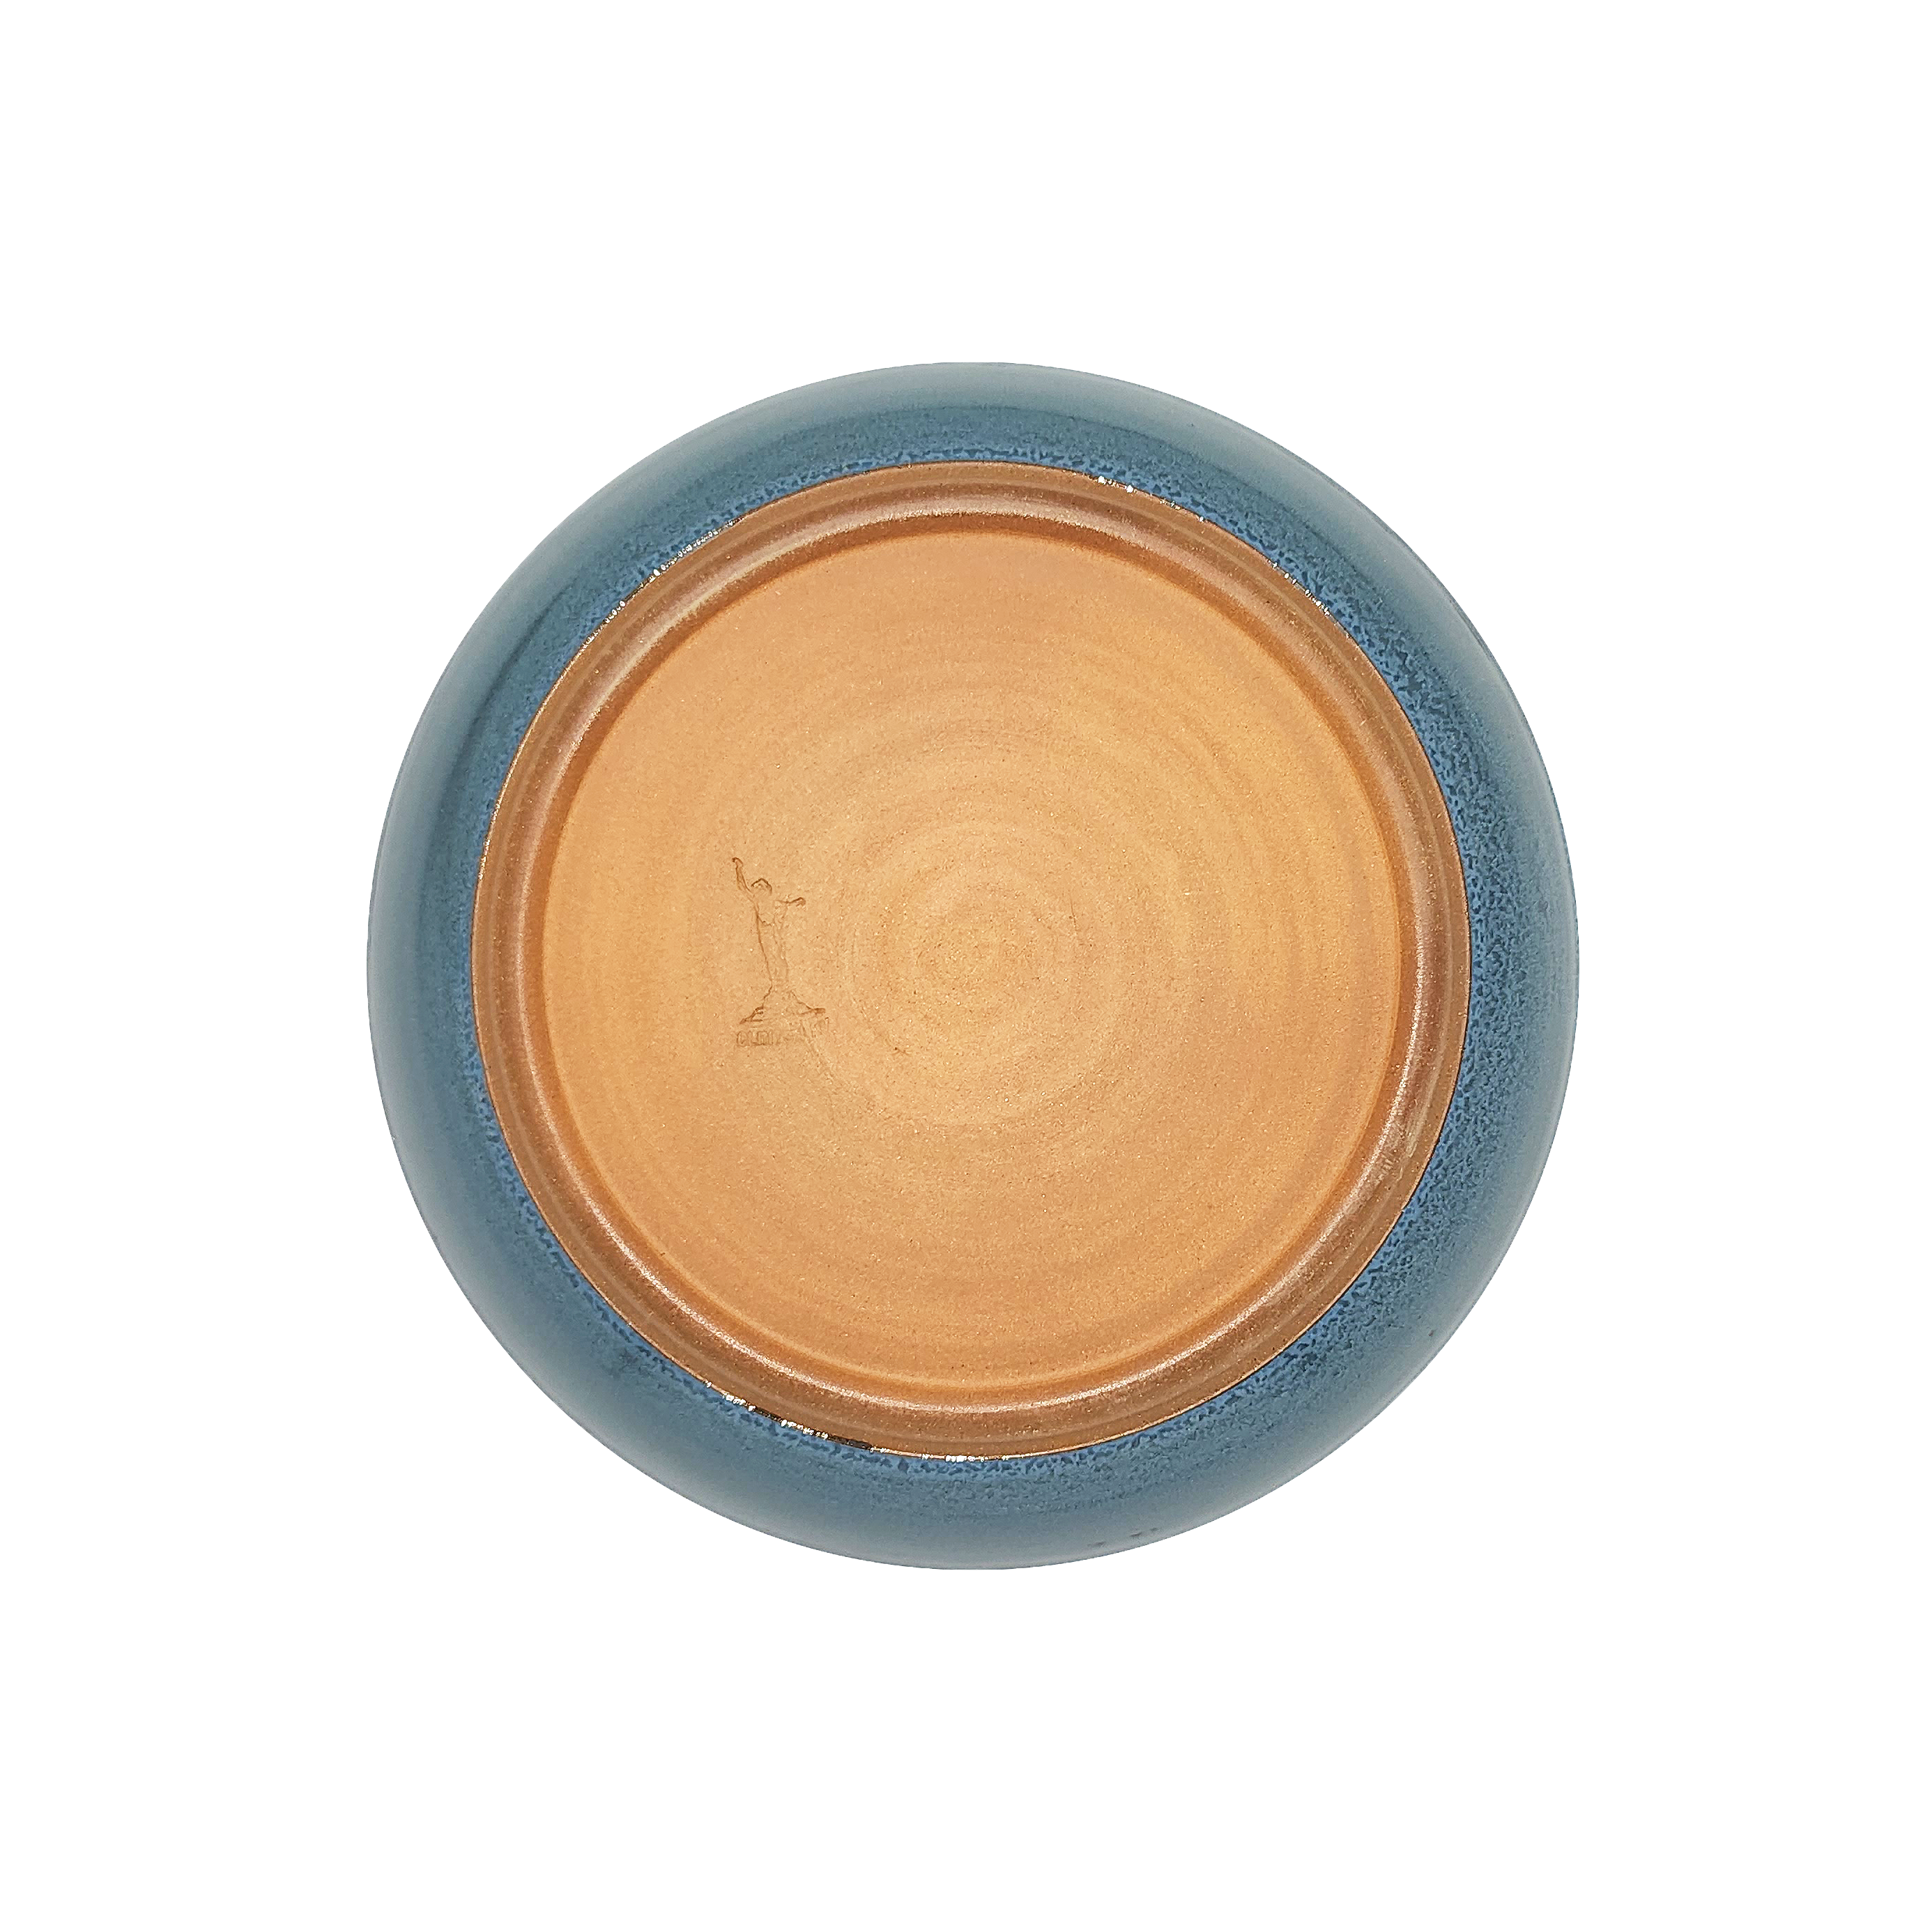 Image: A large pasta dish with a diameter of 10 inches, handcrafted by Clinton Pottery, featuring a light blue glaze. The gentle blue color of the glaze adds a calming and soothing ambiance, making it an ideal choice for presenting generous servings of pasta dishes with a hint of tranquility.